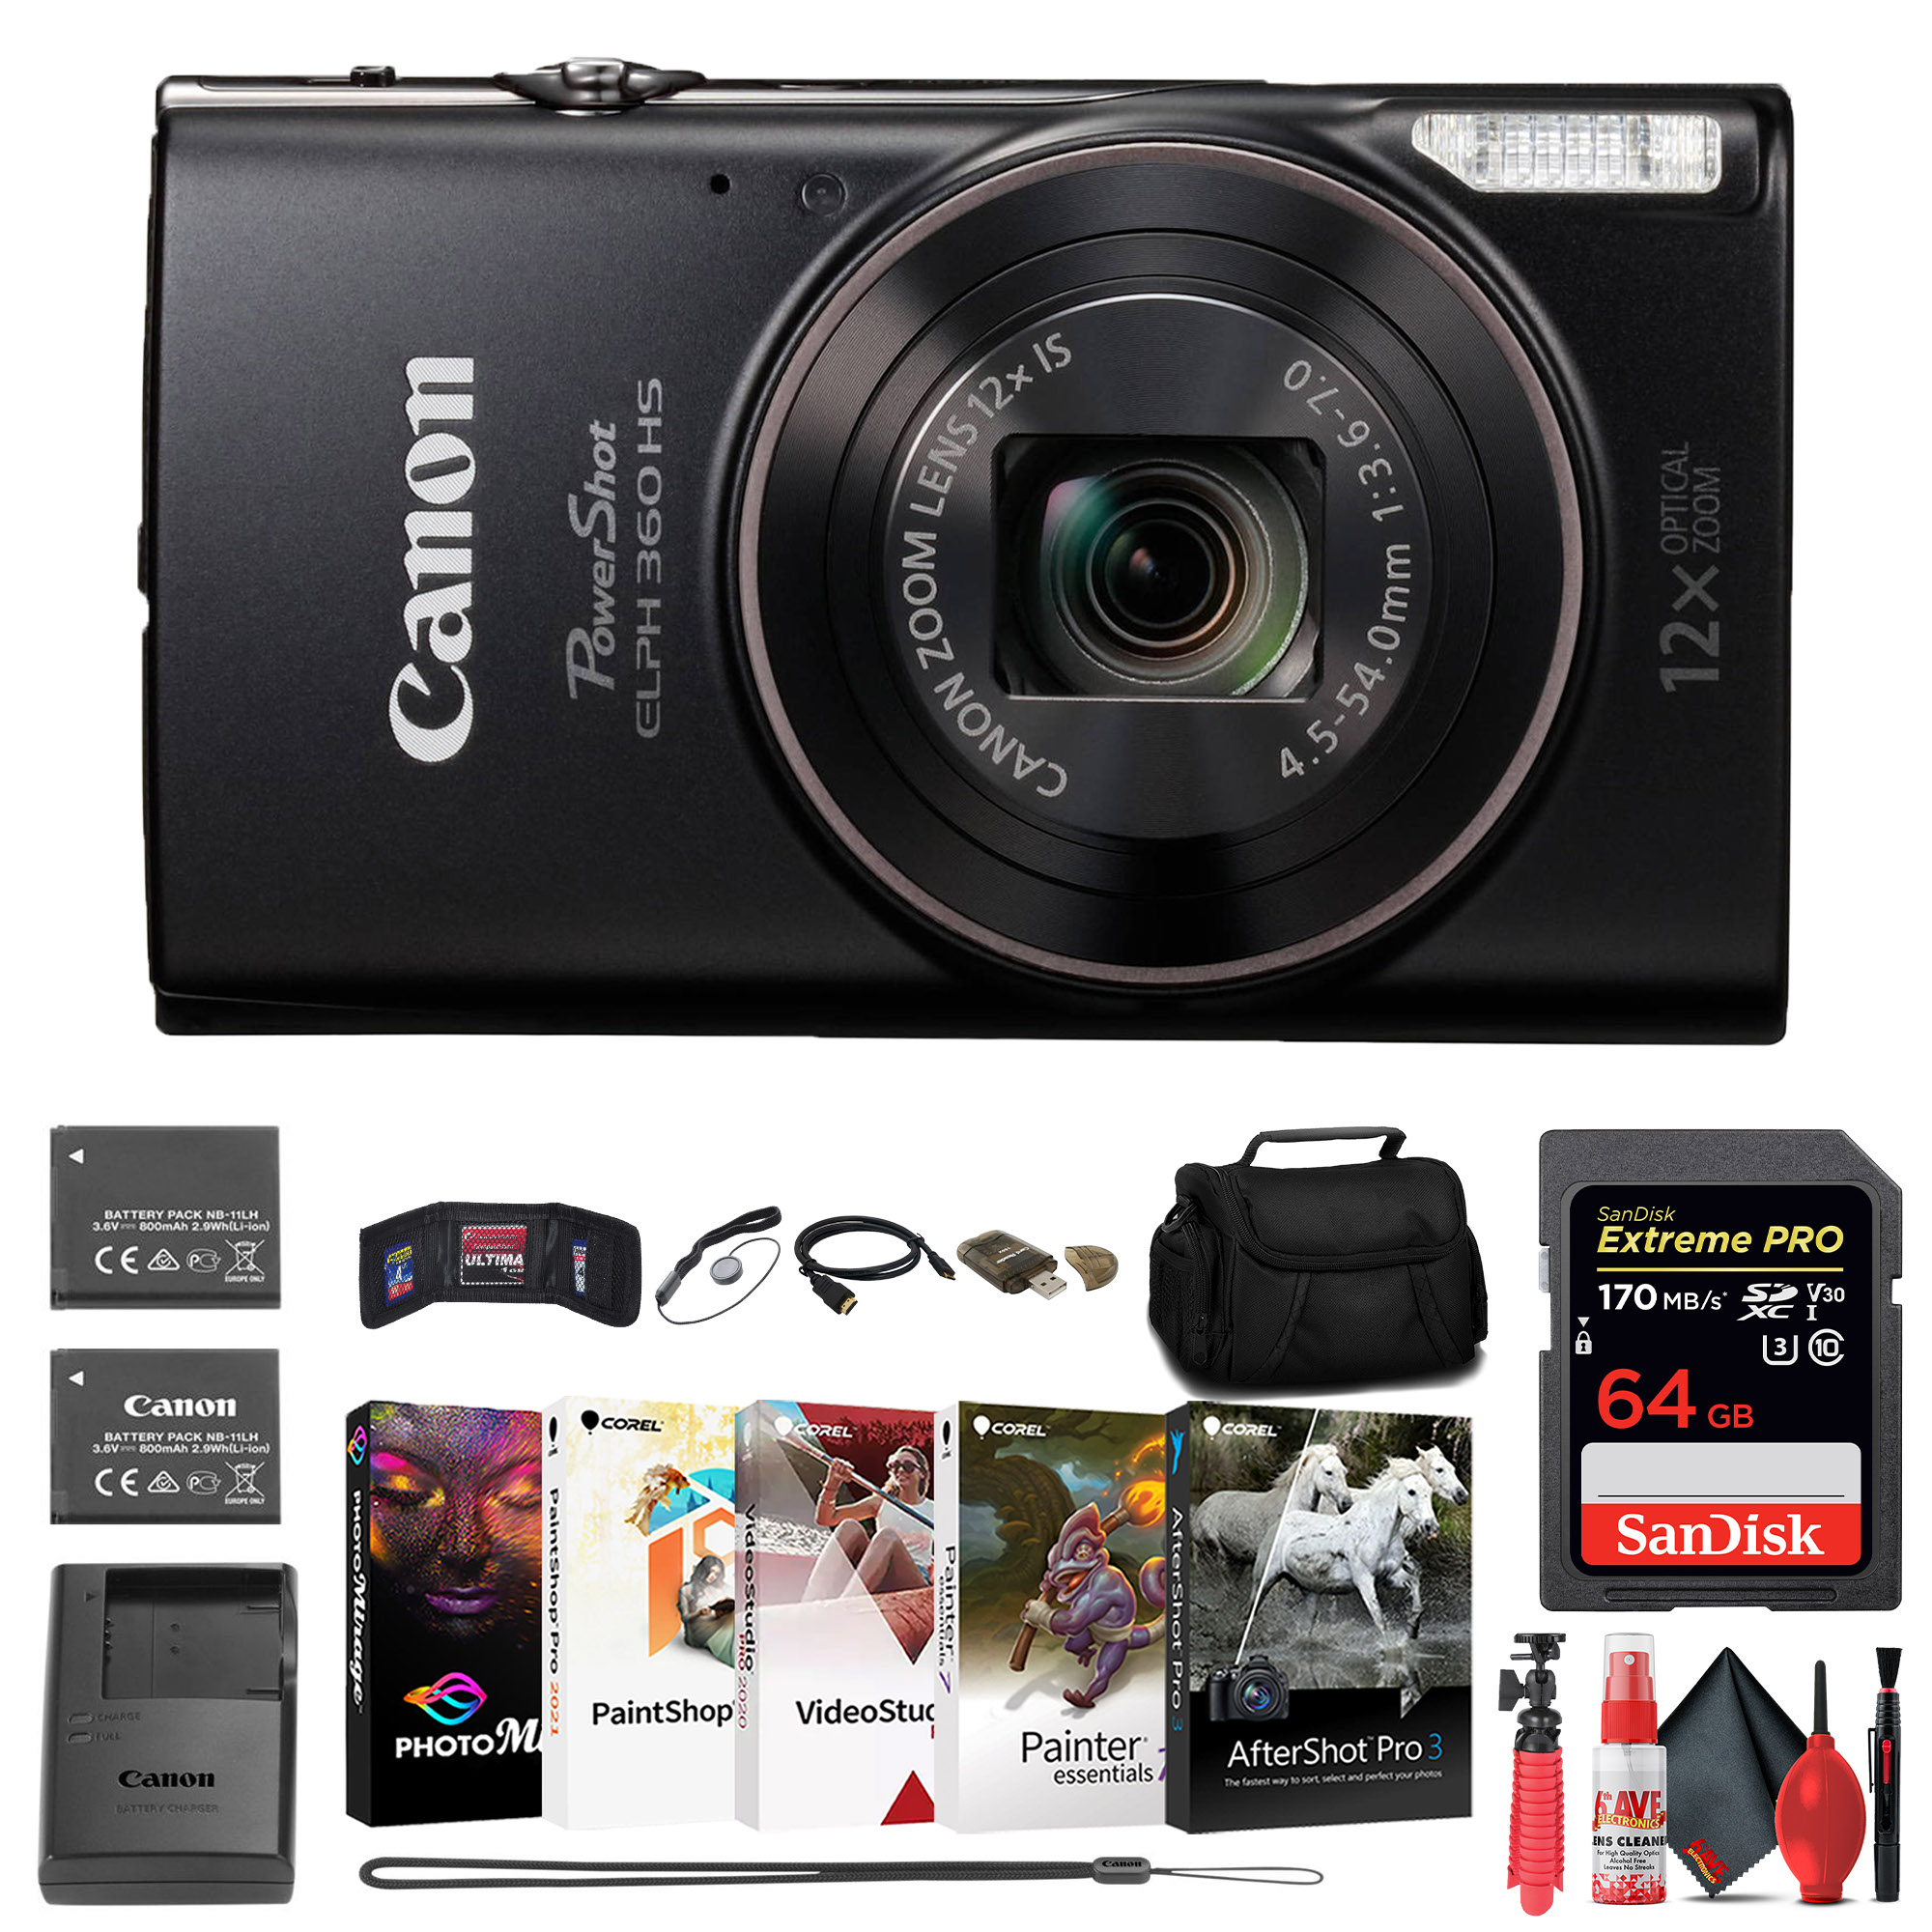 Canon PowerShot ELPH 360 HS Digital Camera (Black) (1075C001) + 64GB Memory Card + NB11L Battery + Case + Charger + Card Reader + Corel Photo Software + HDMI Cable + Flex Tripod + More - image 1 of 6